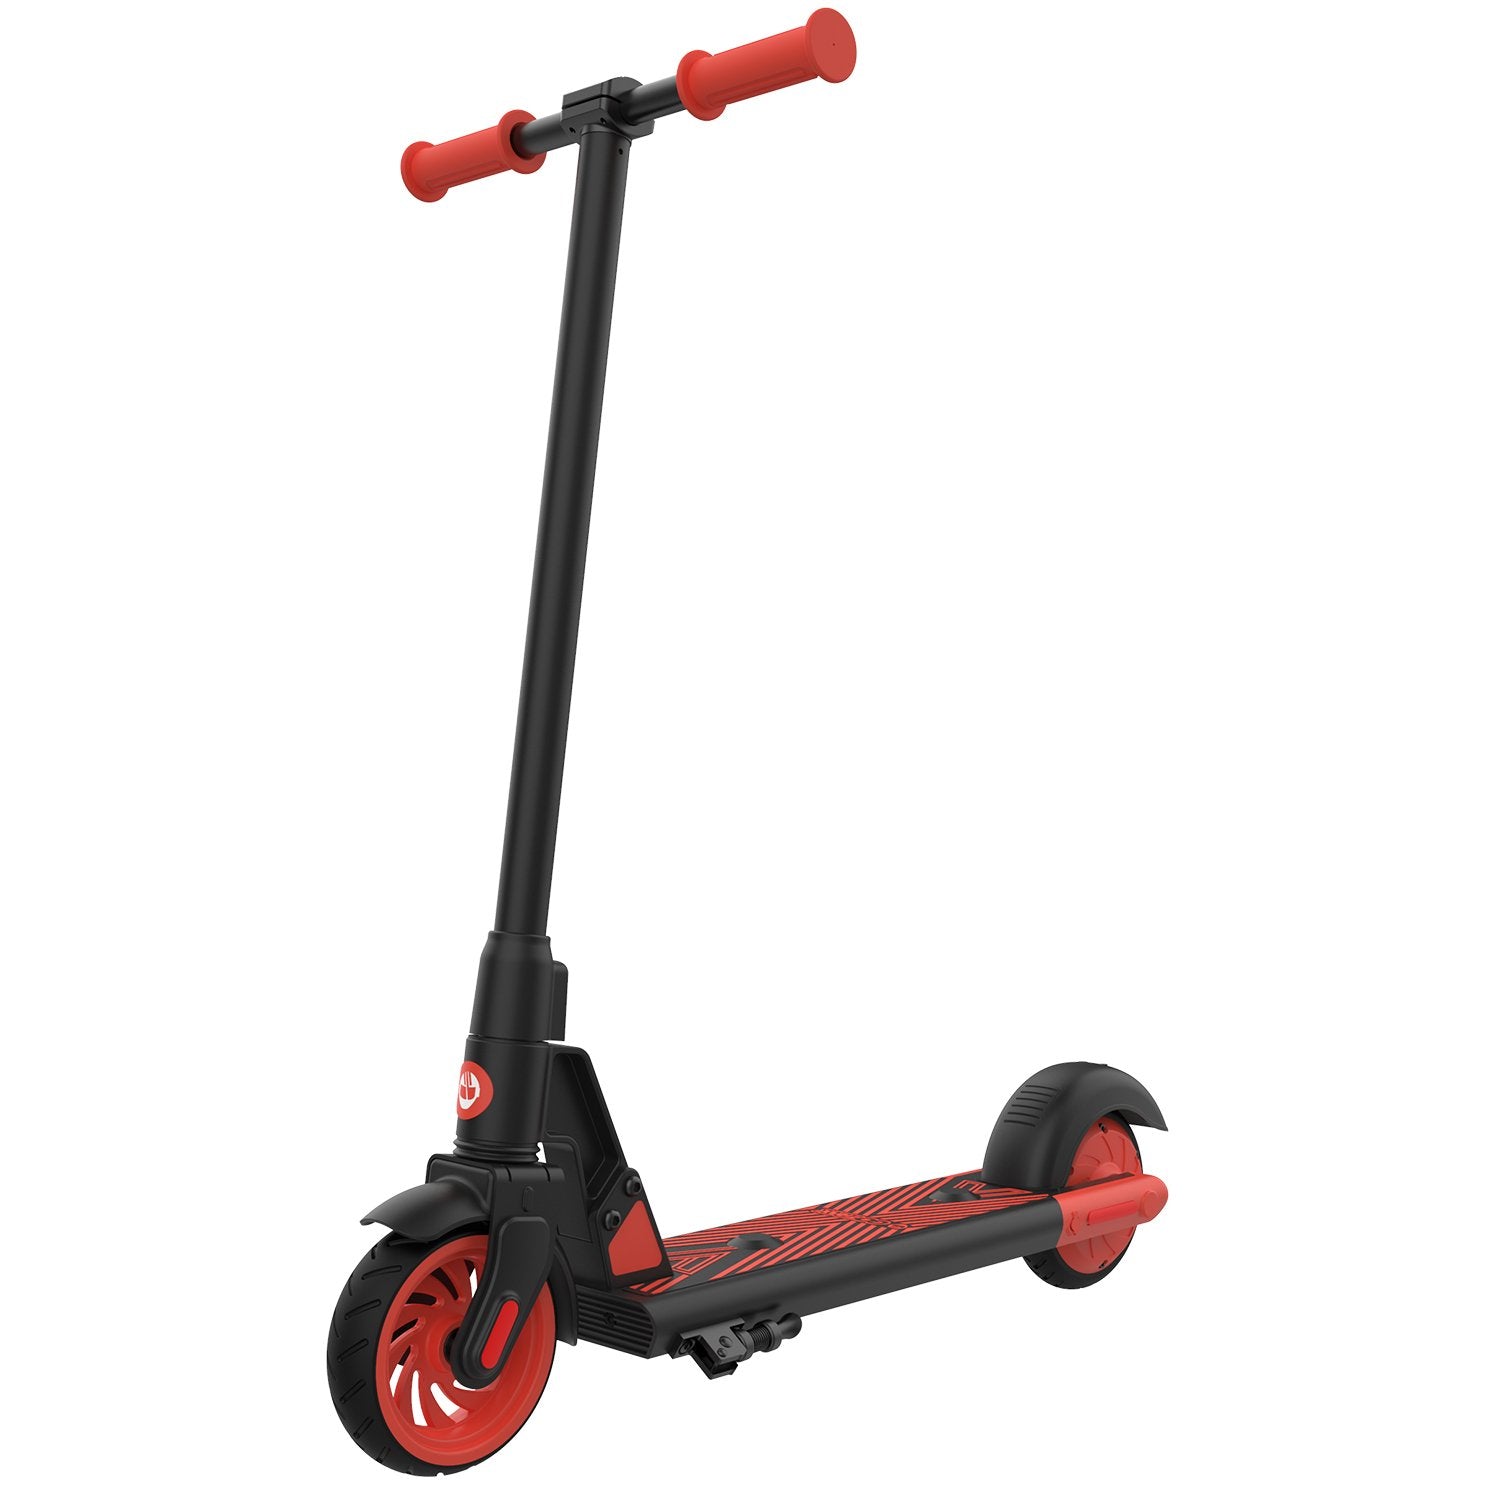 Red gks electric scooter for kids main image